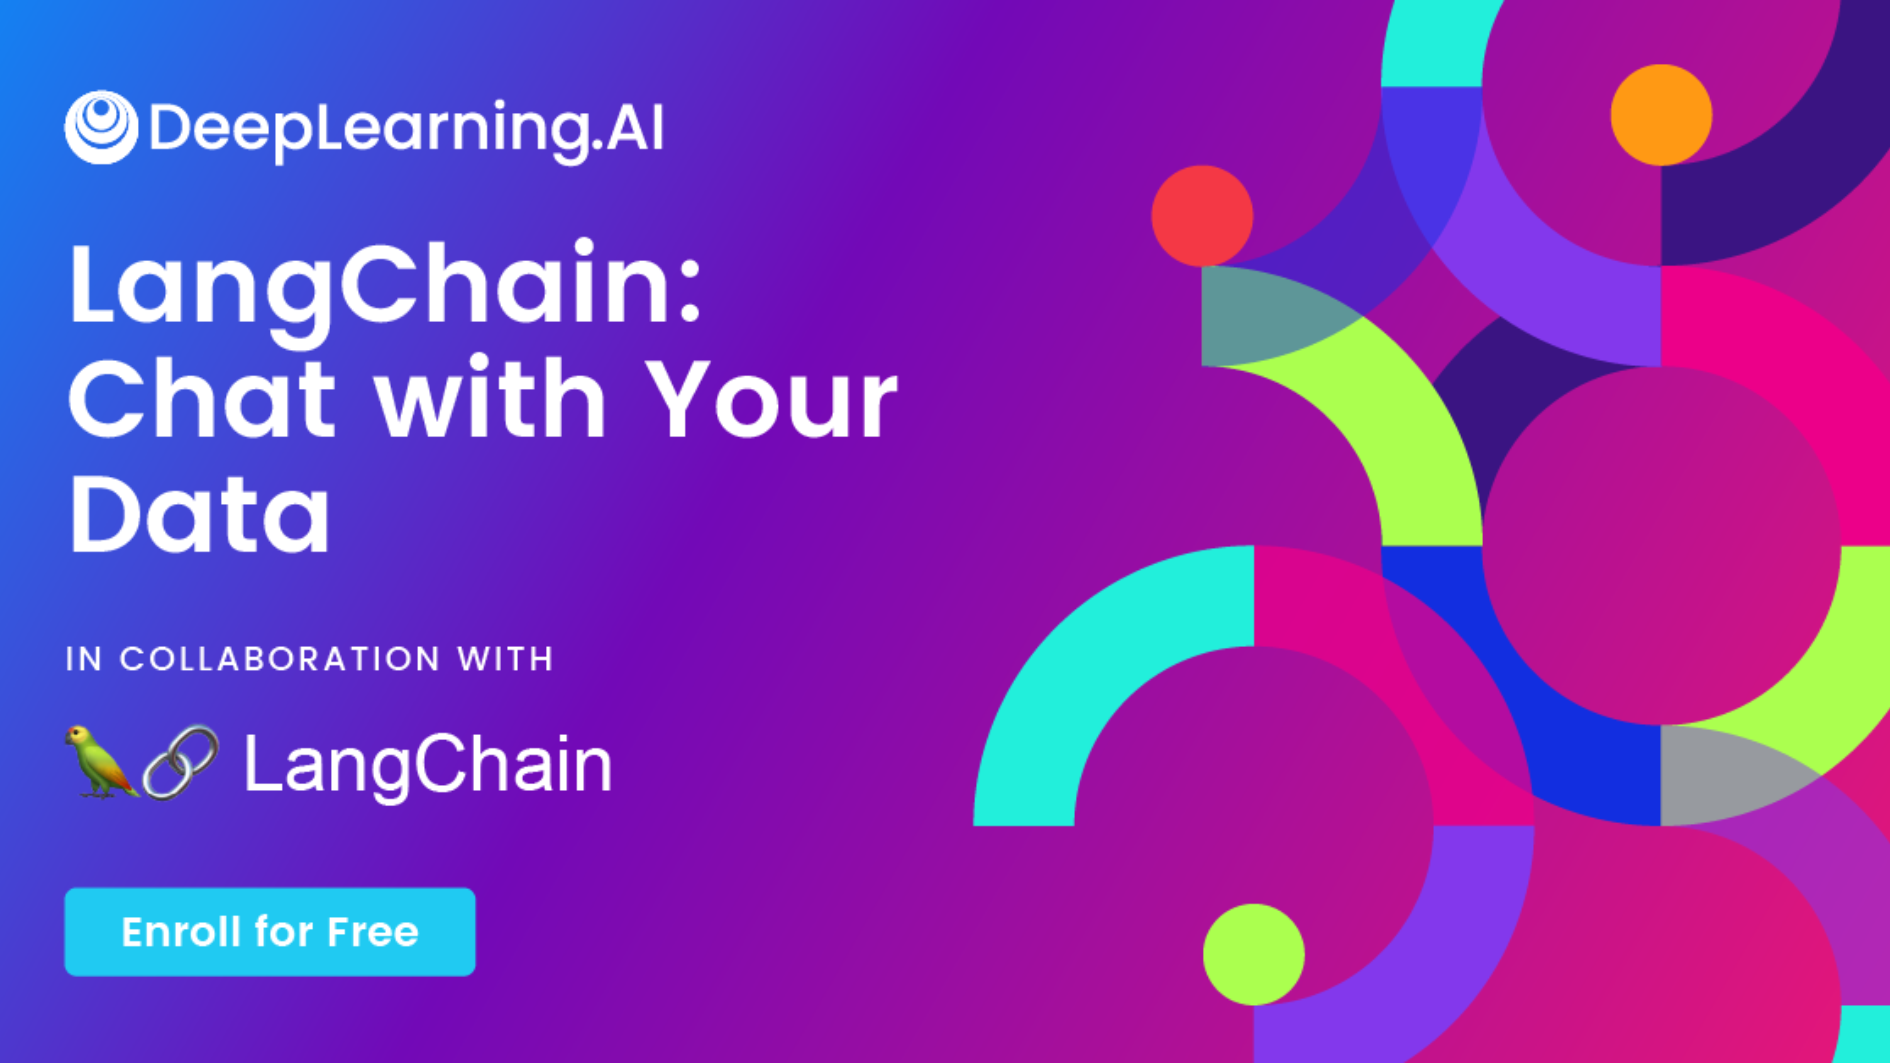 LangChain: Chat with Your Data course promo banner